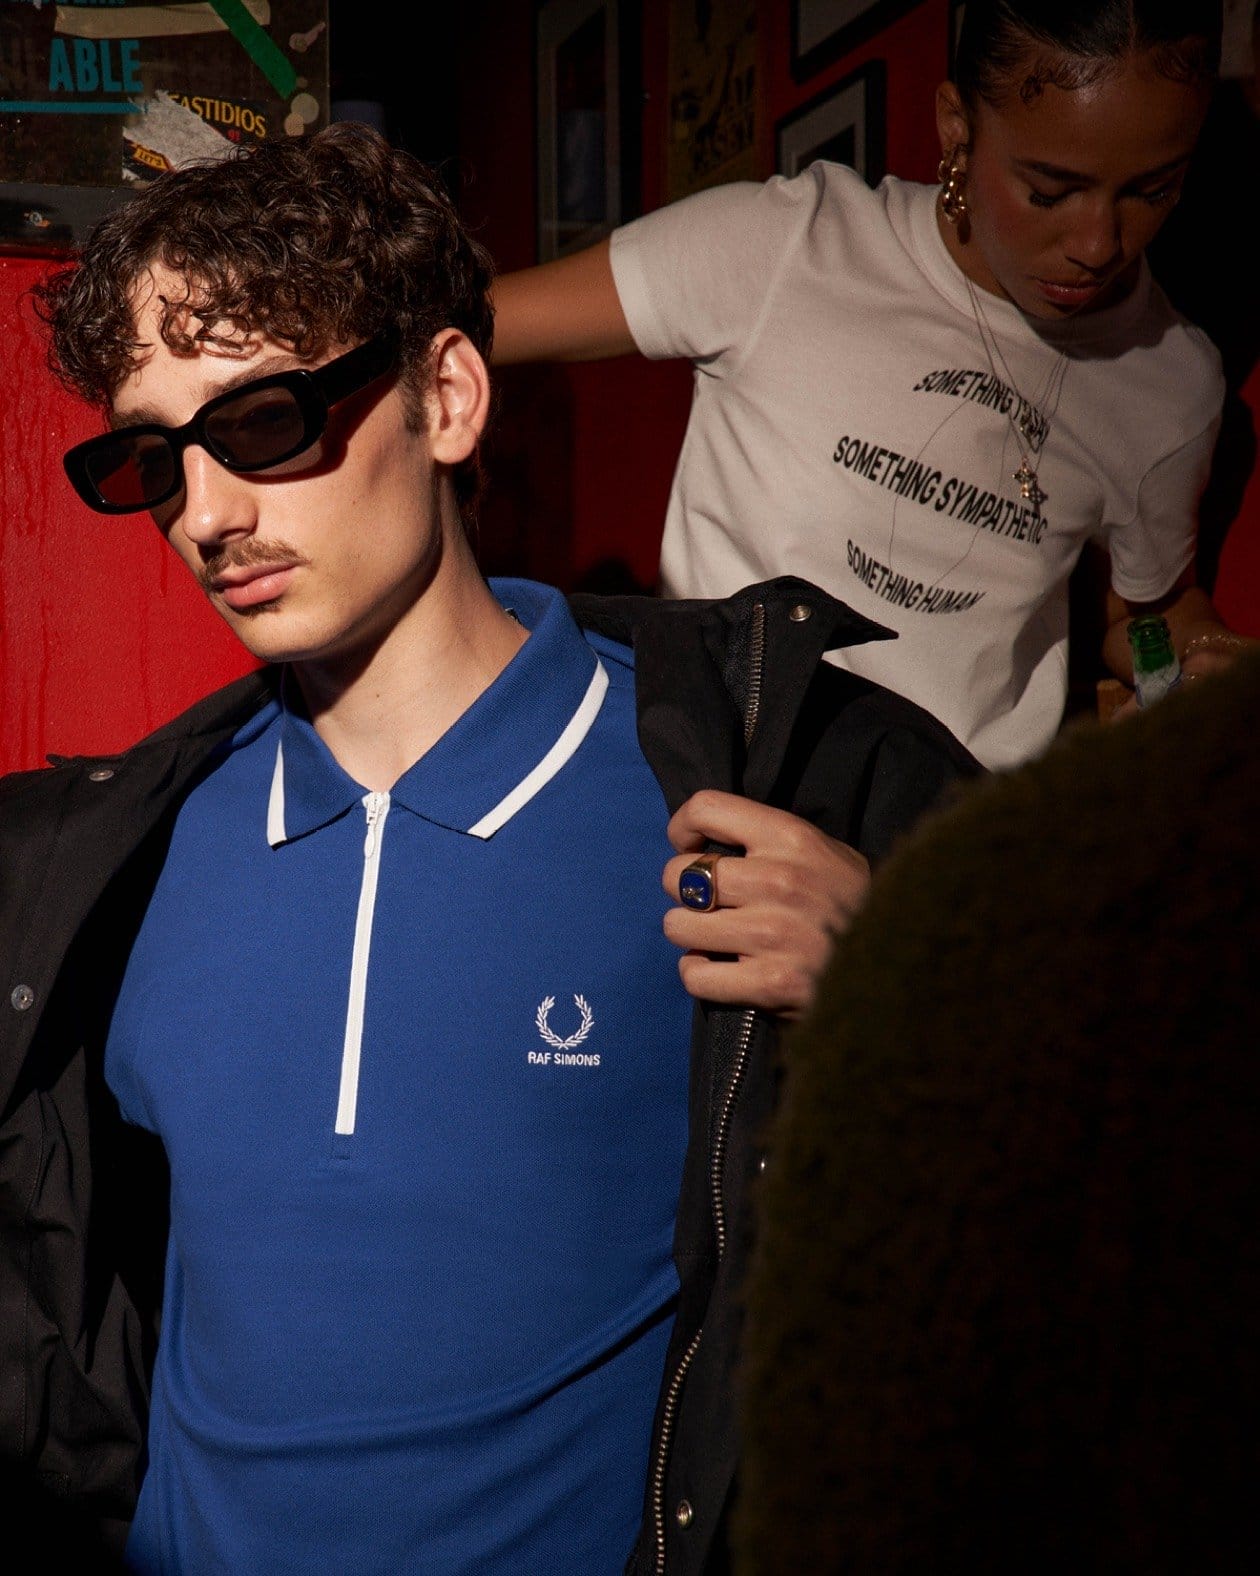 Fred Perry x Raf Simons - the final instalment